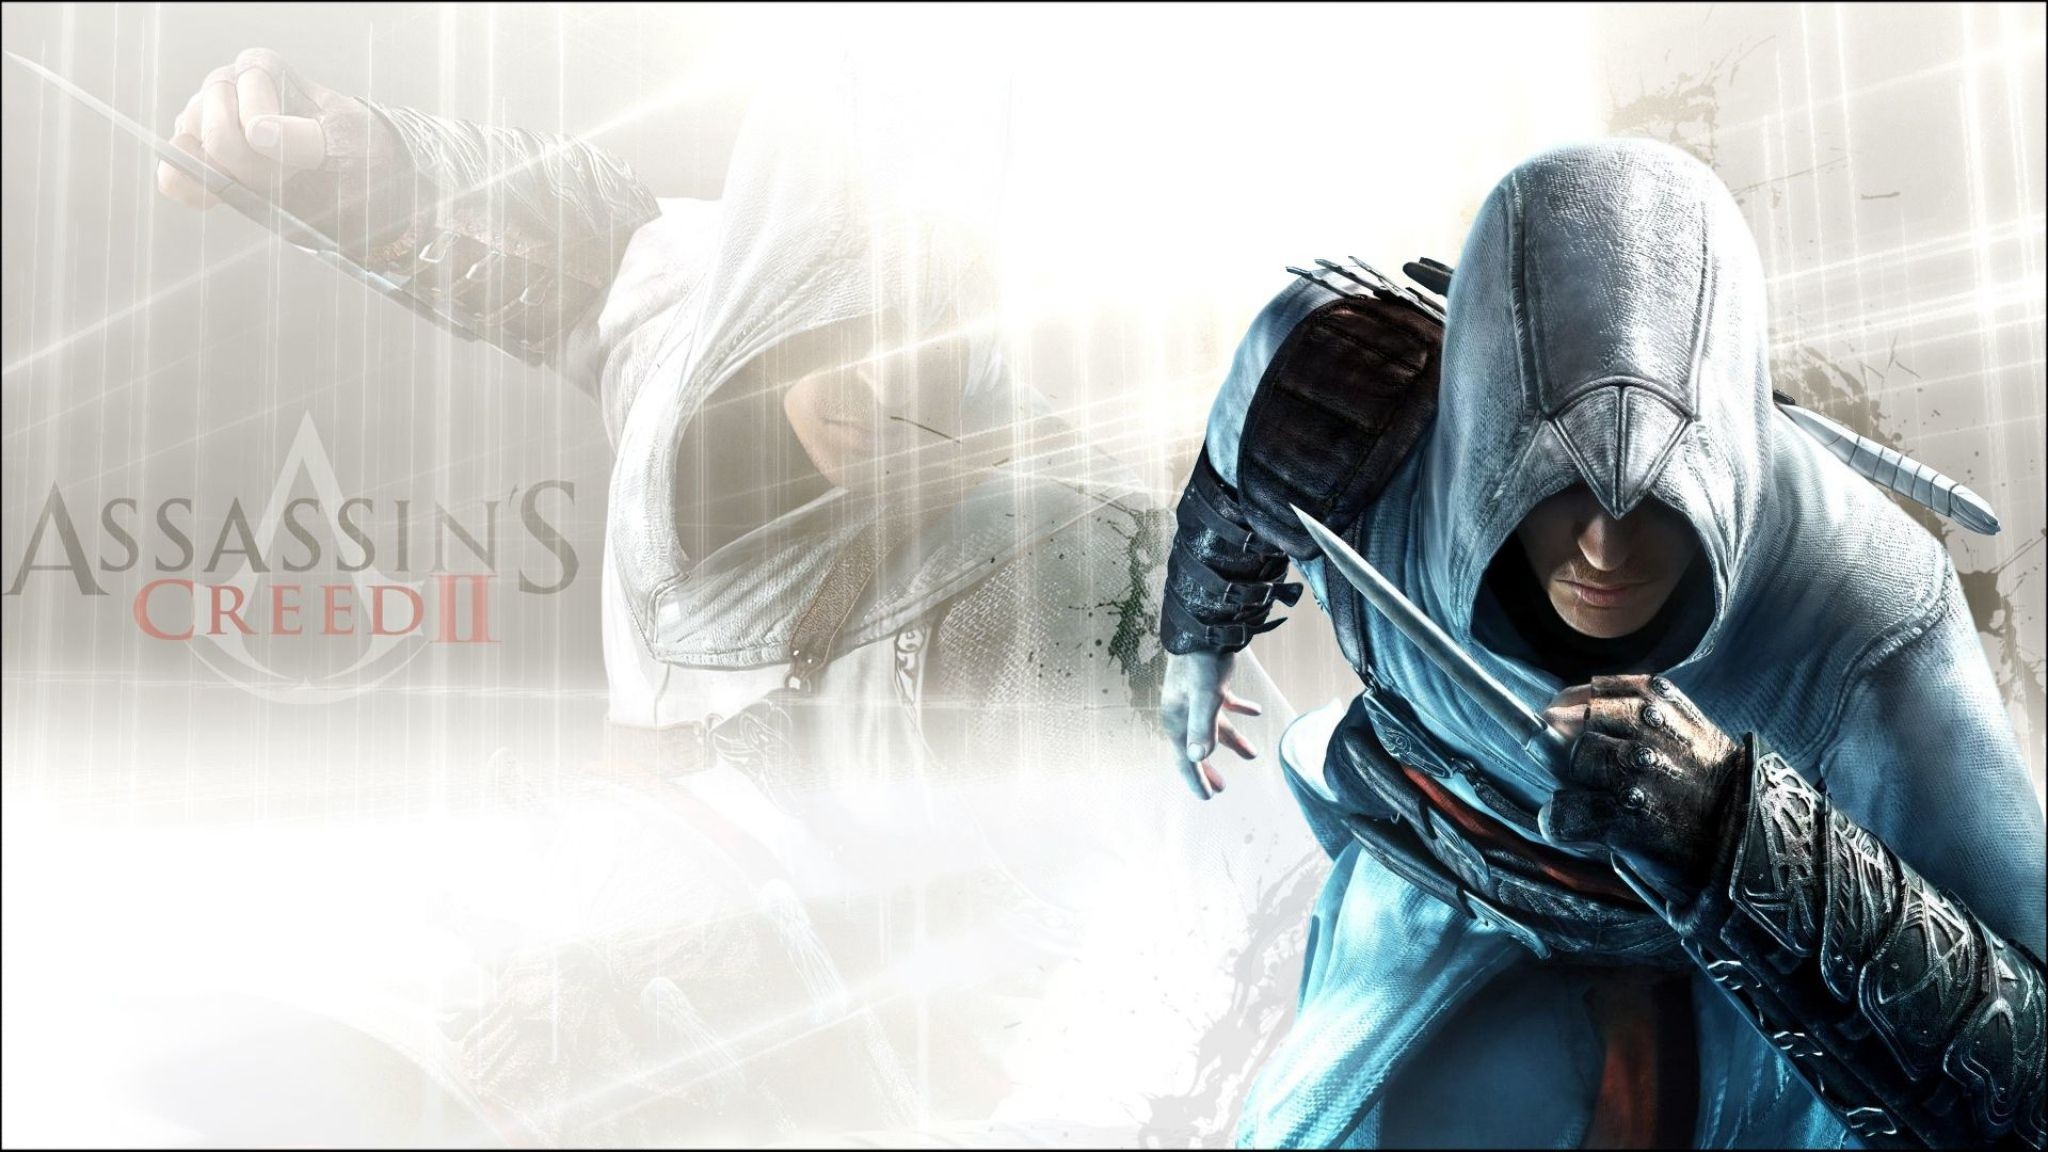 Download Wallpaper Assassins creed 2, Background